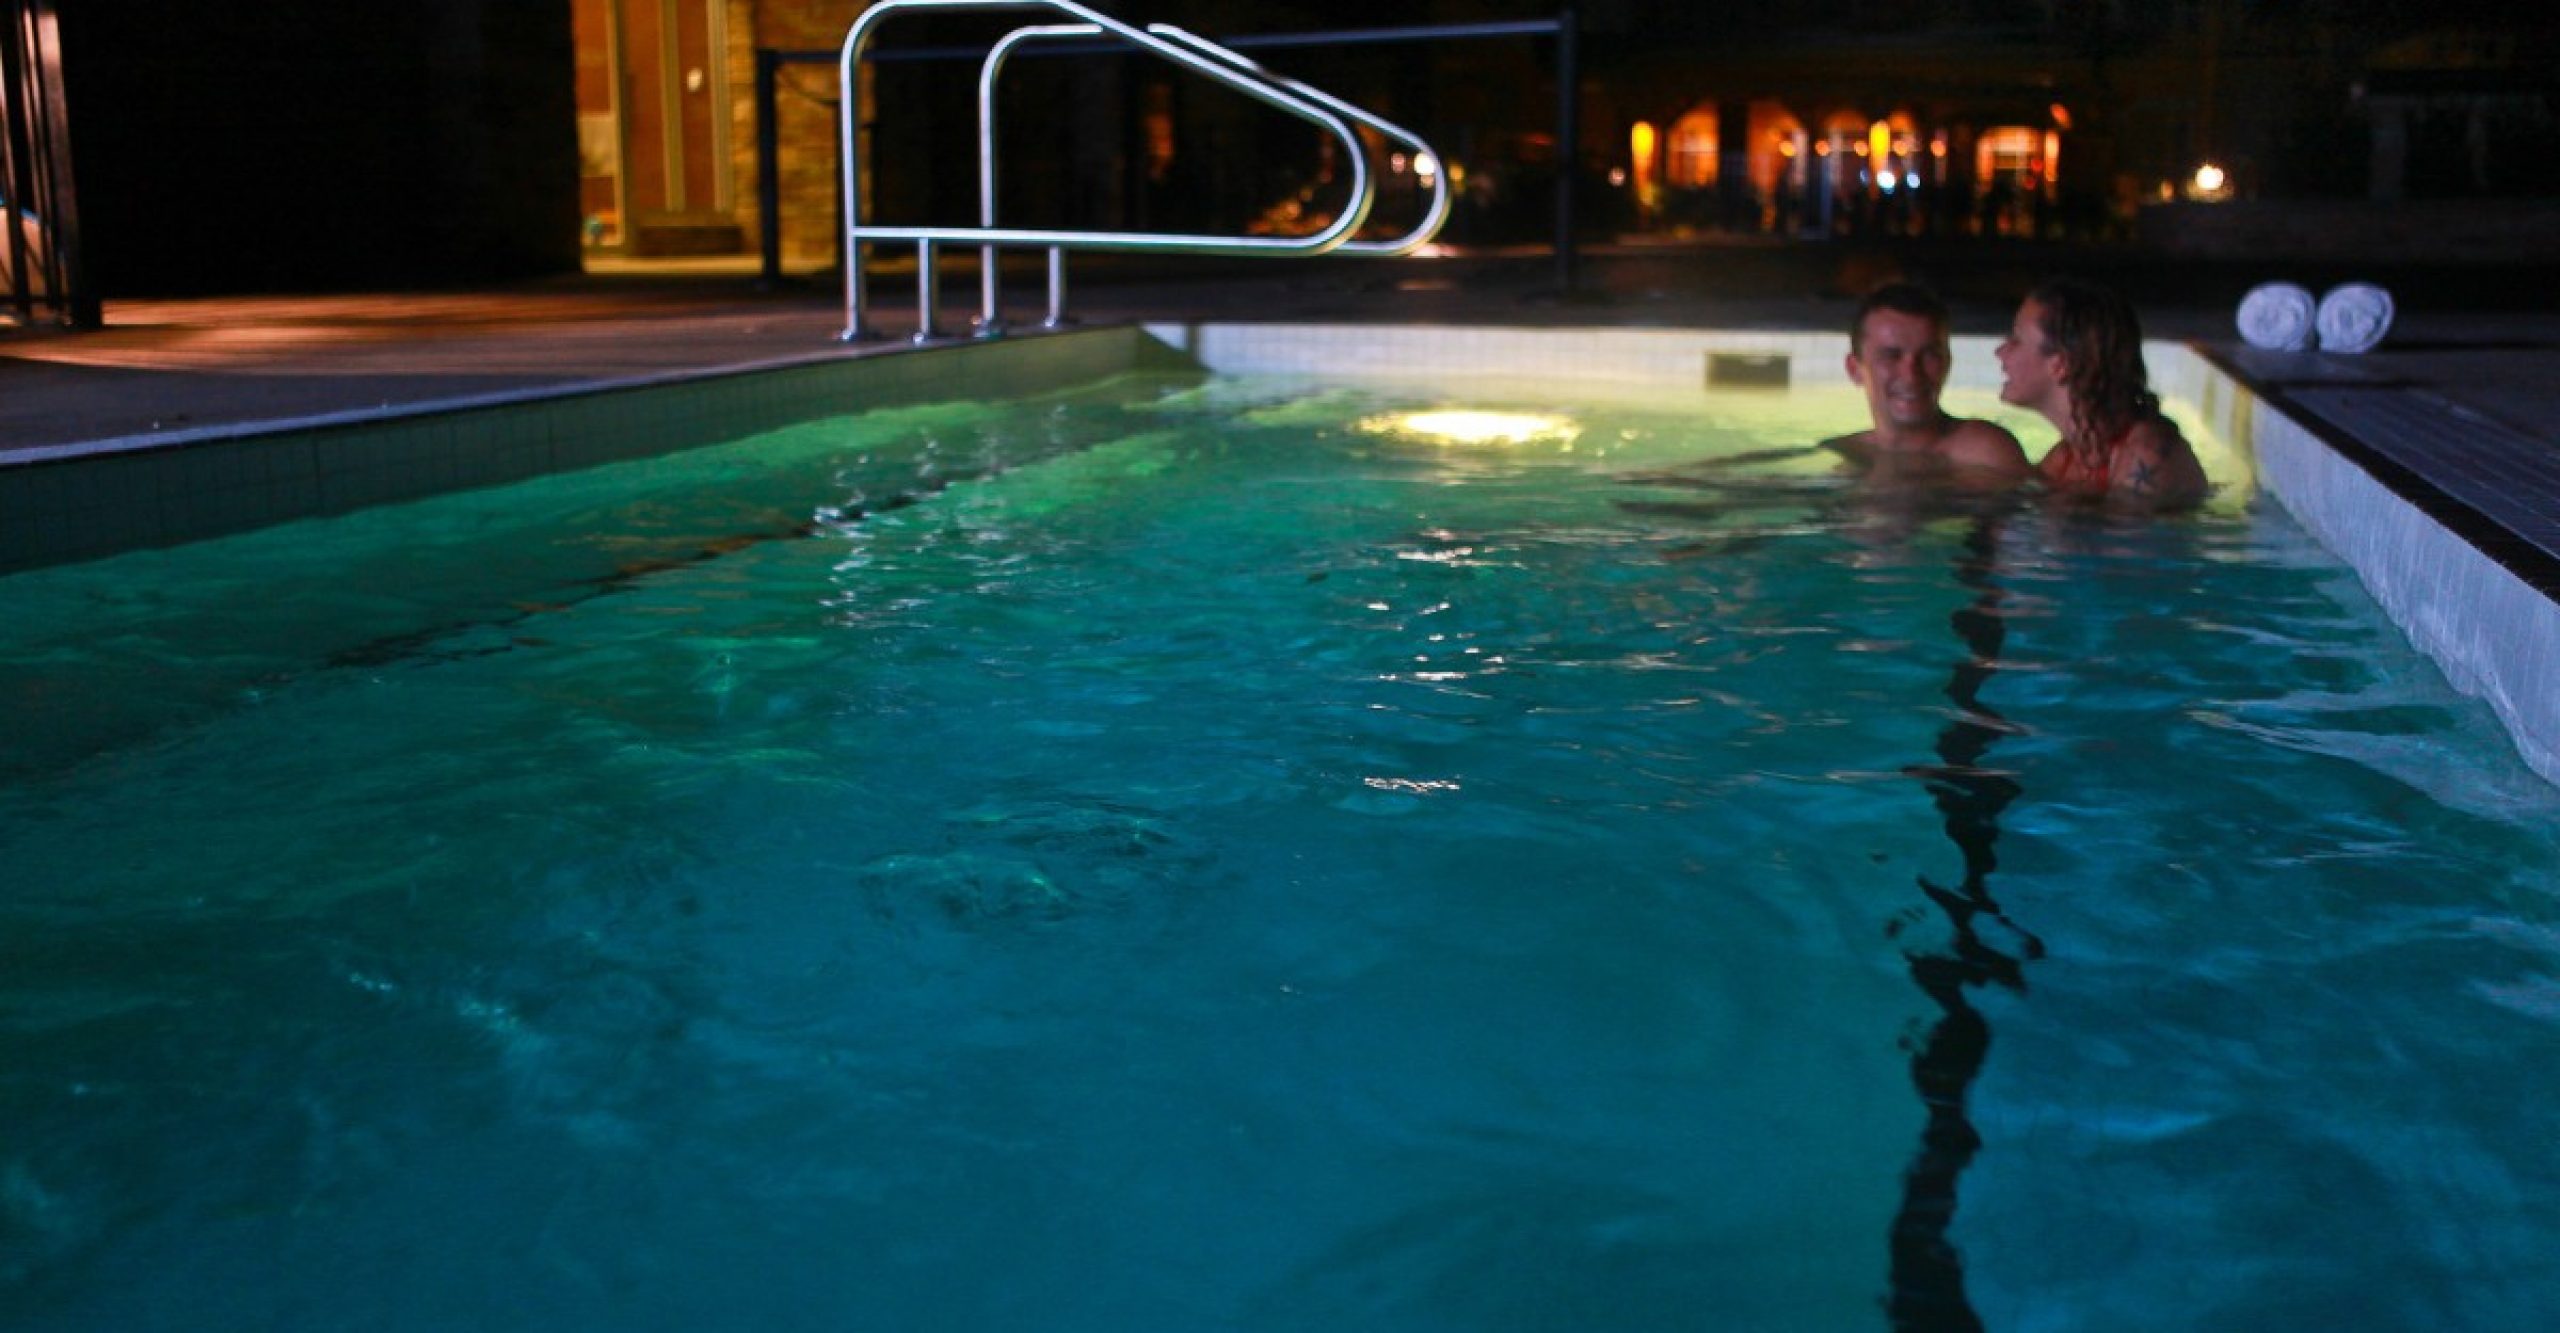 couple relaxing in hot tub at night